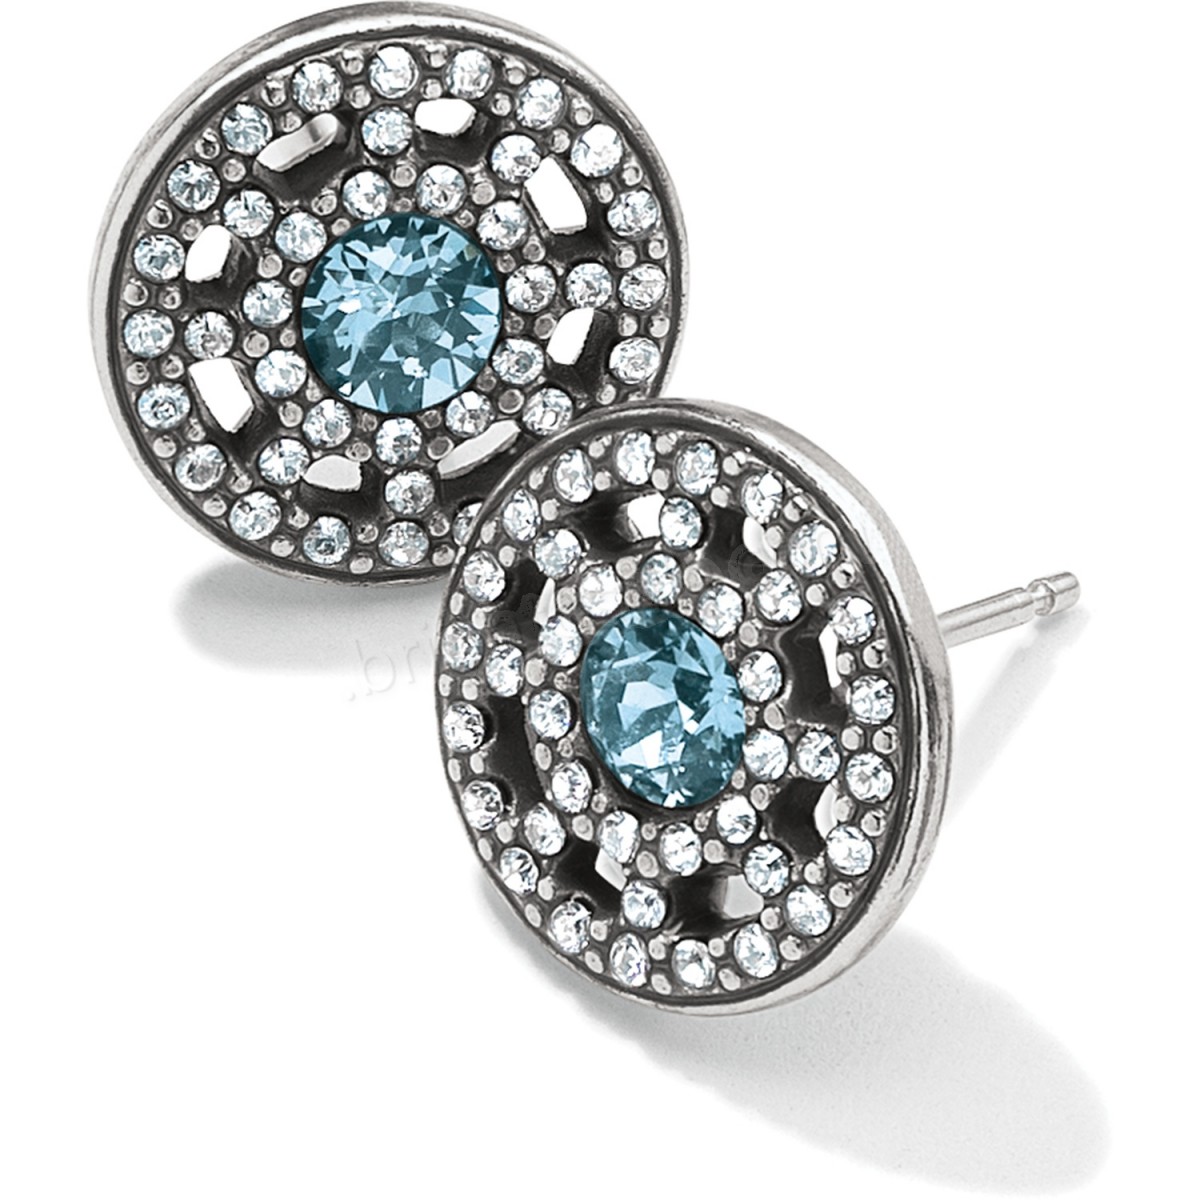 Brighton Collectibles & Online Discount Illumina Post Earrings - -3